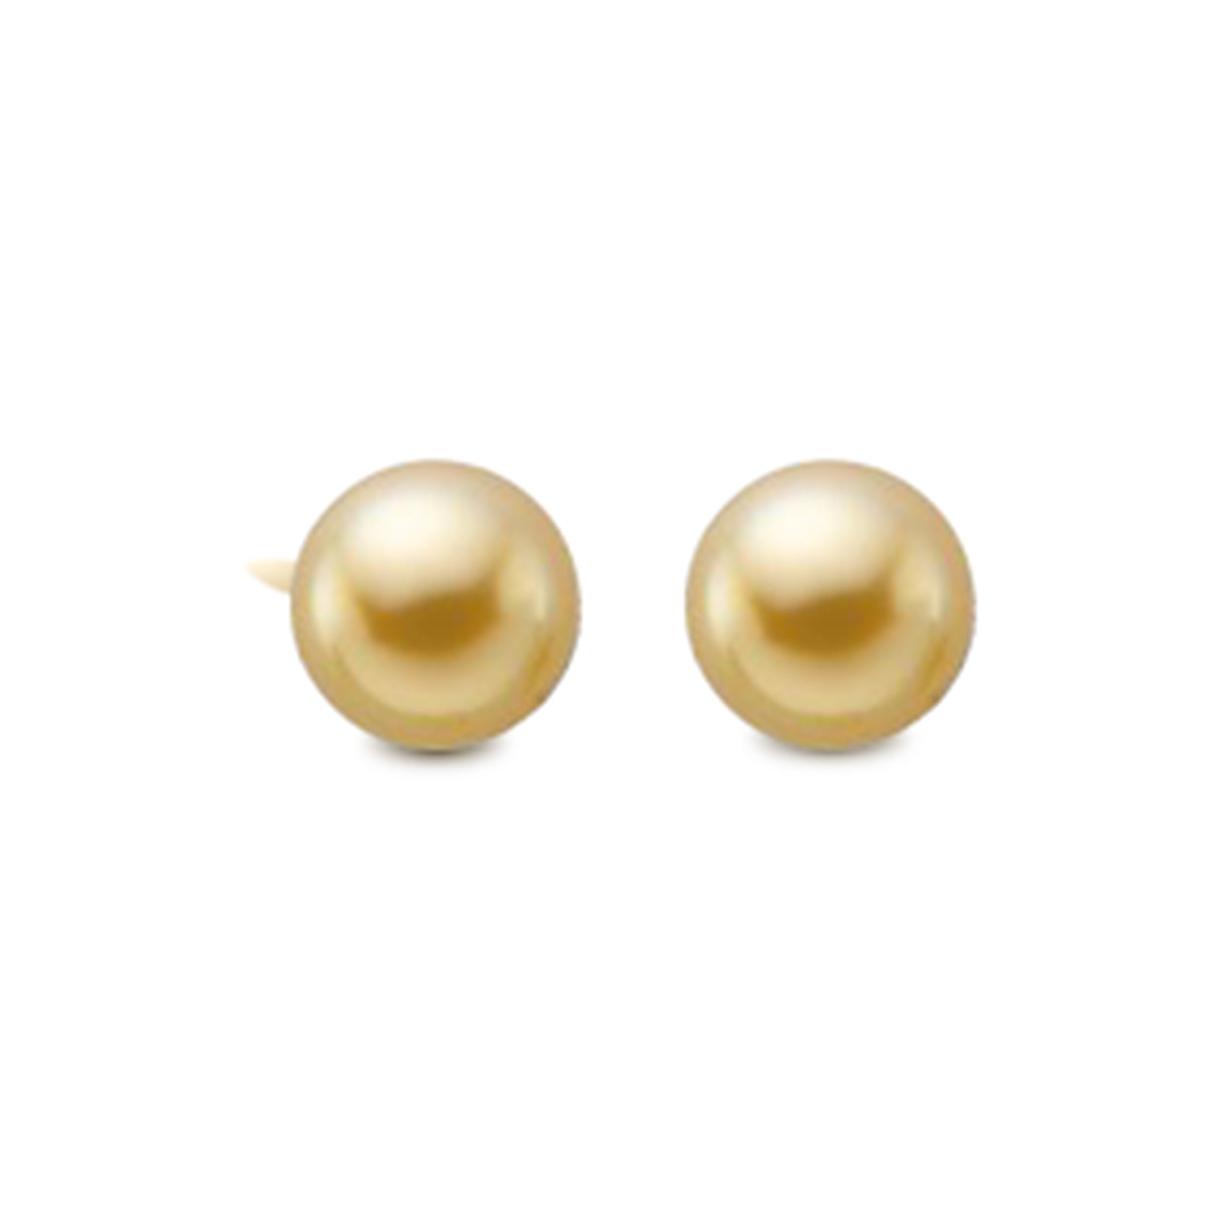 Child's Yellow Gold Ball Earrings, 4mm